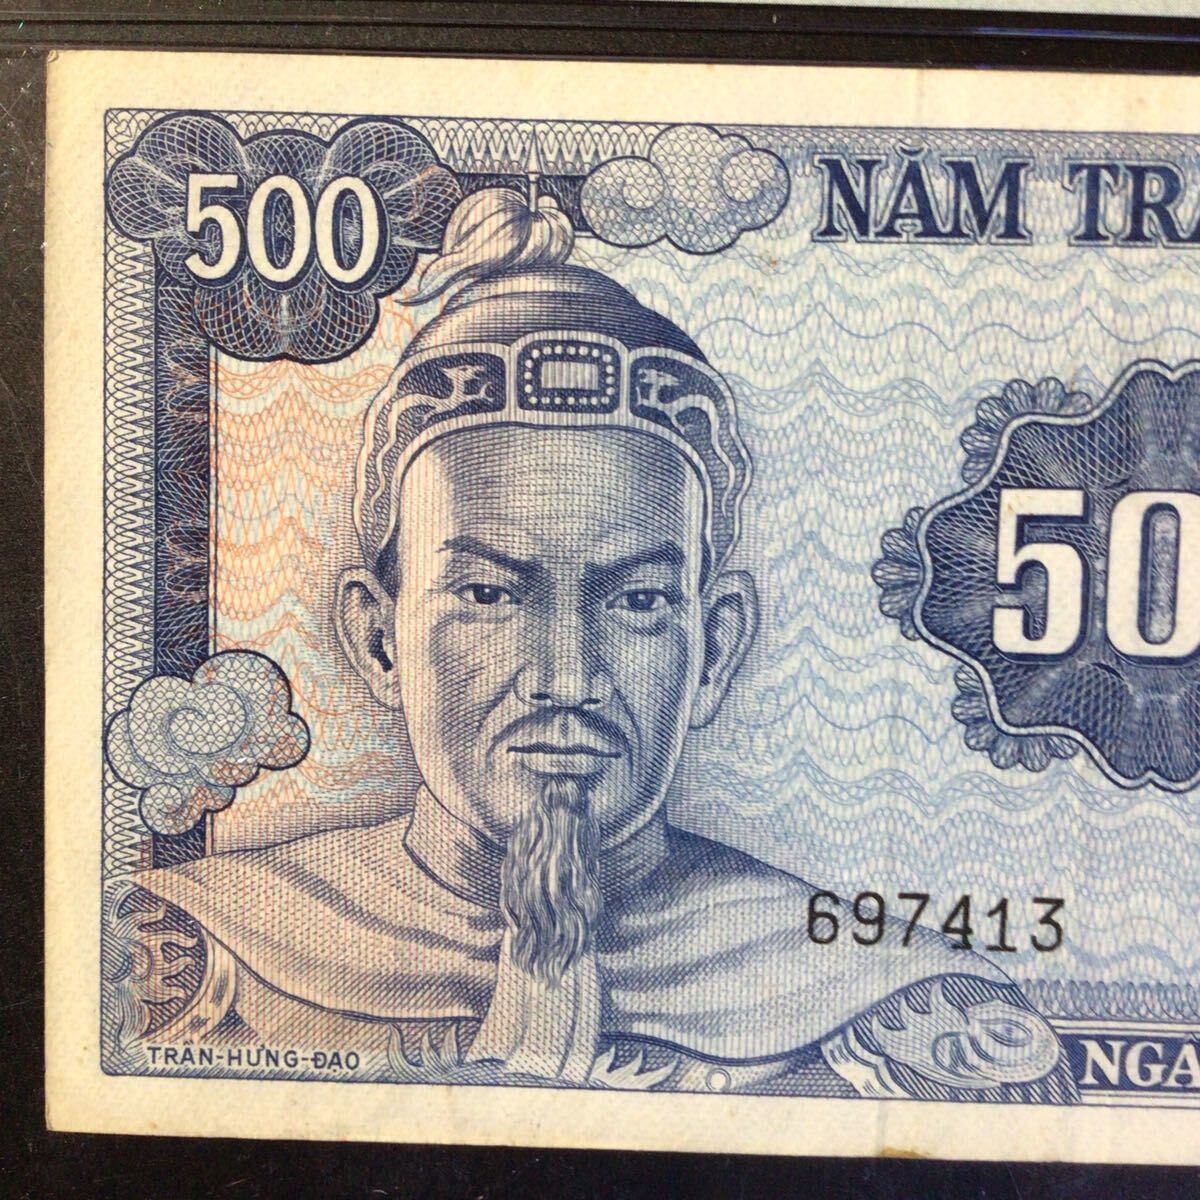 World Banknote Grading SOUTH VIET NAM《National Bank》500 Dong【1966】『PMG Grading Choice Very Fine 35』._画像4